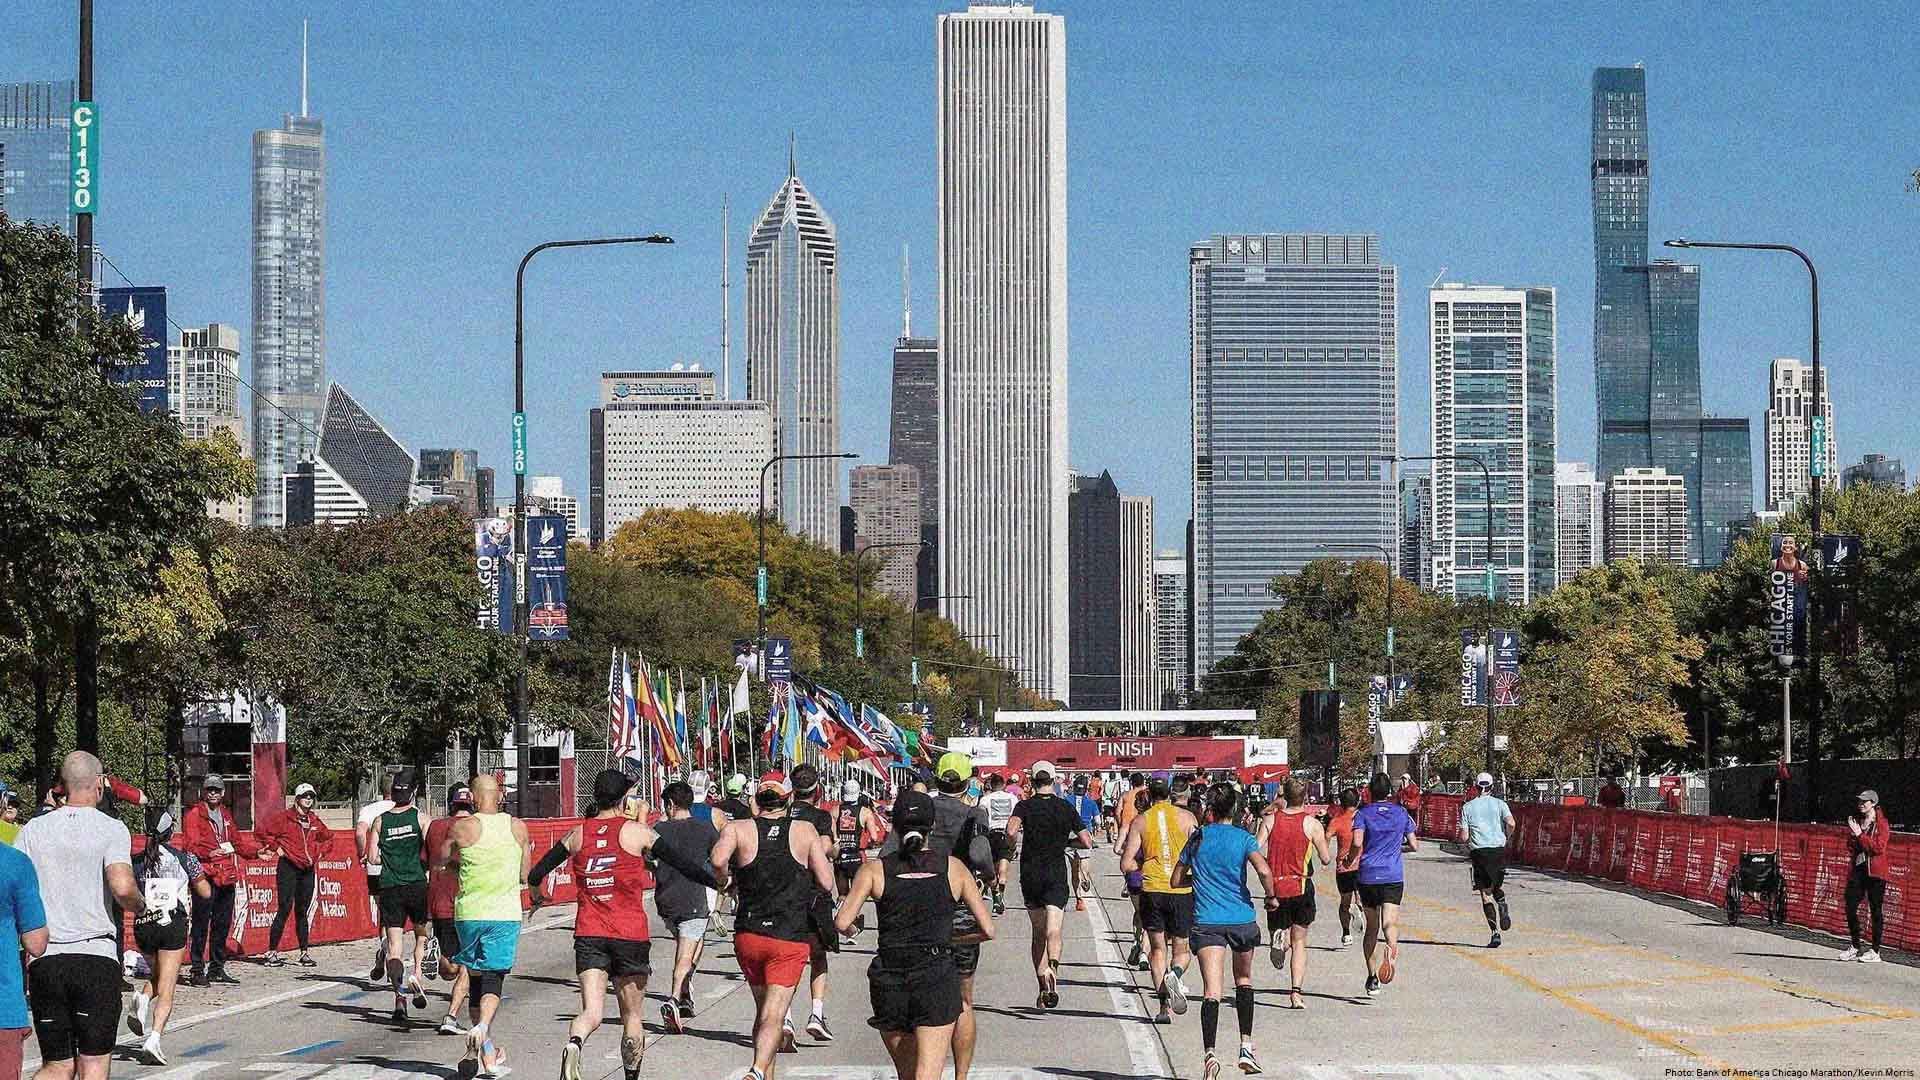 Wide photo from the rear of dozens of runners competing in the Chicago Marathon. In the background, tall skyscrapers form an impressive skyline.